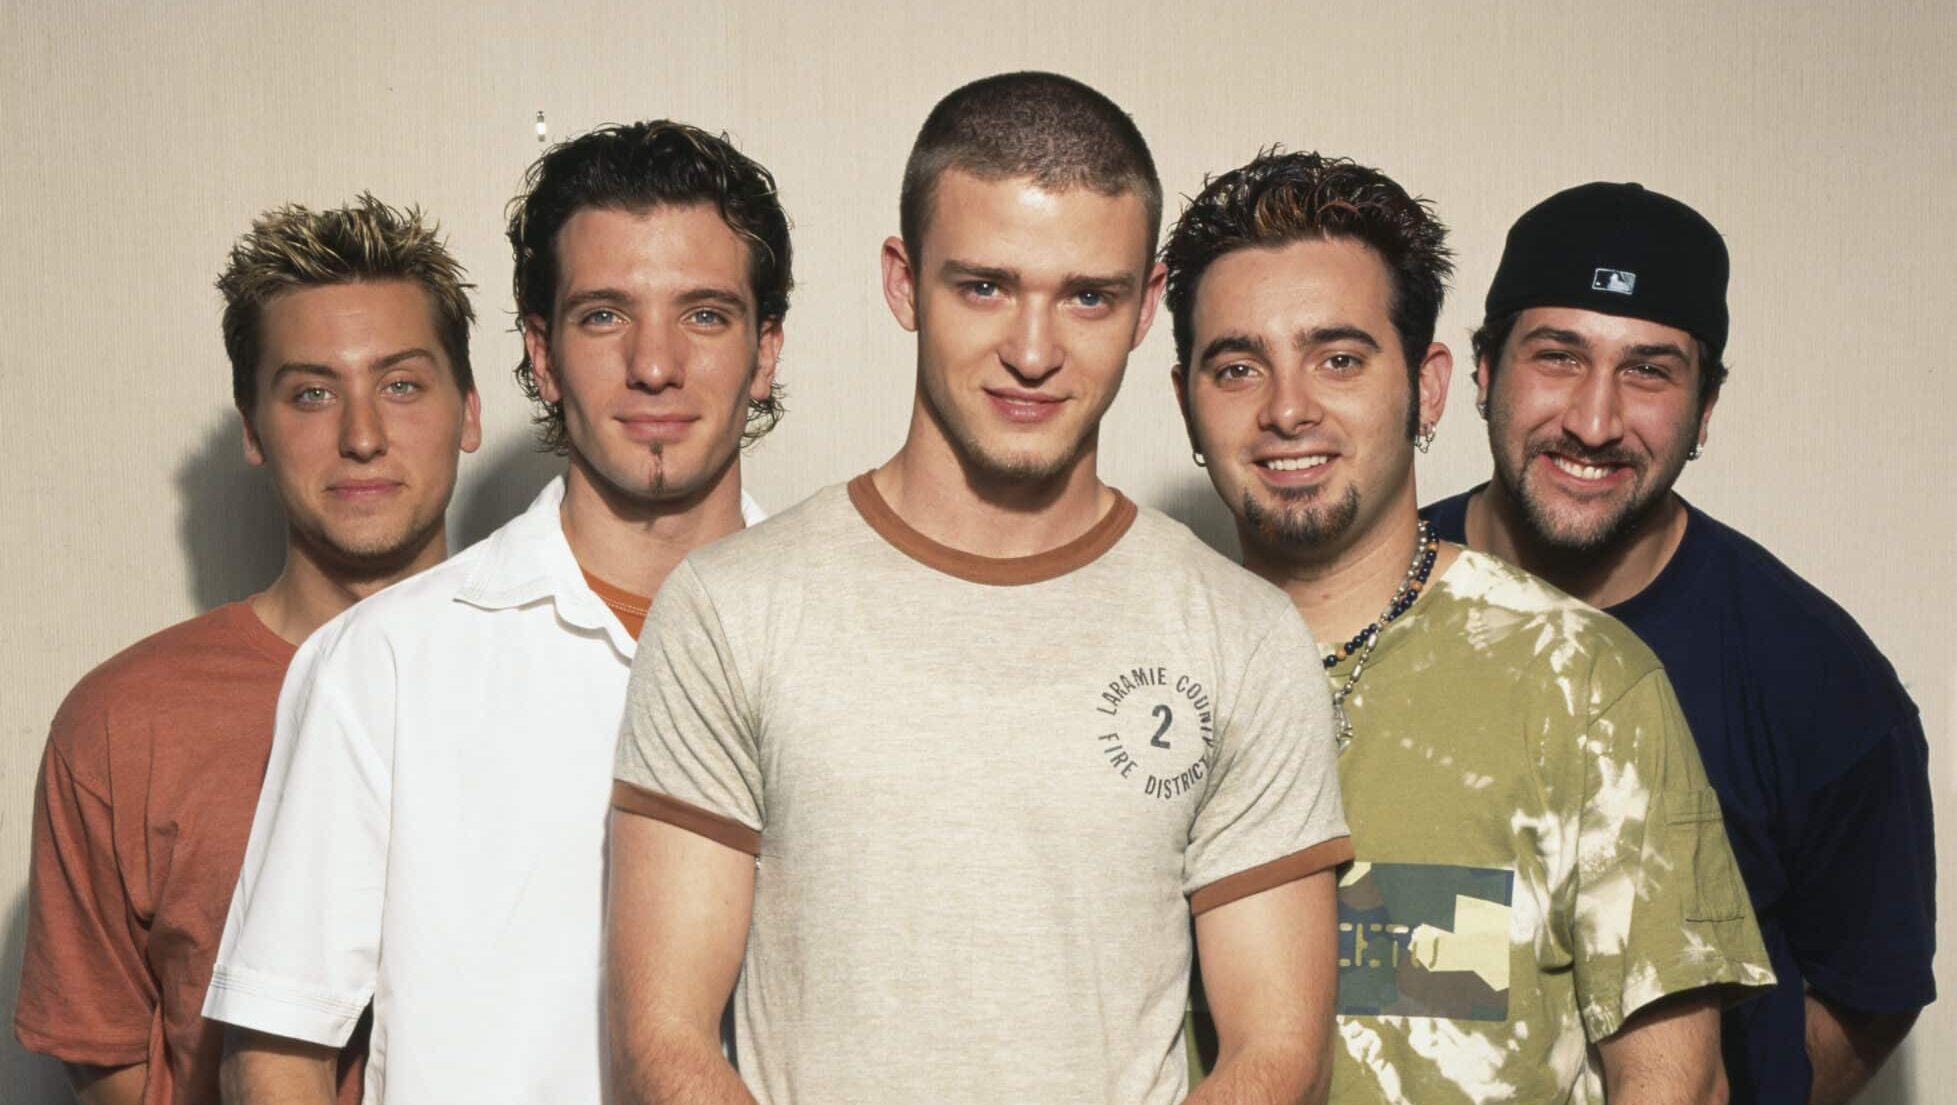 American boy band 'N Sync, circa 2001. From left to right, they are Lance Bass, JC Chasez, Justin Timberlake, Chris Kirkpatrick and Joey Fatone.